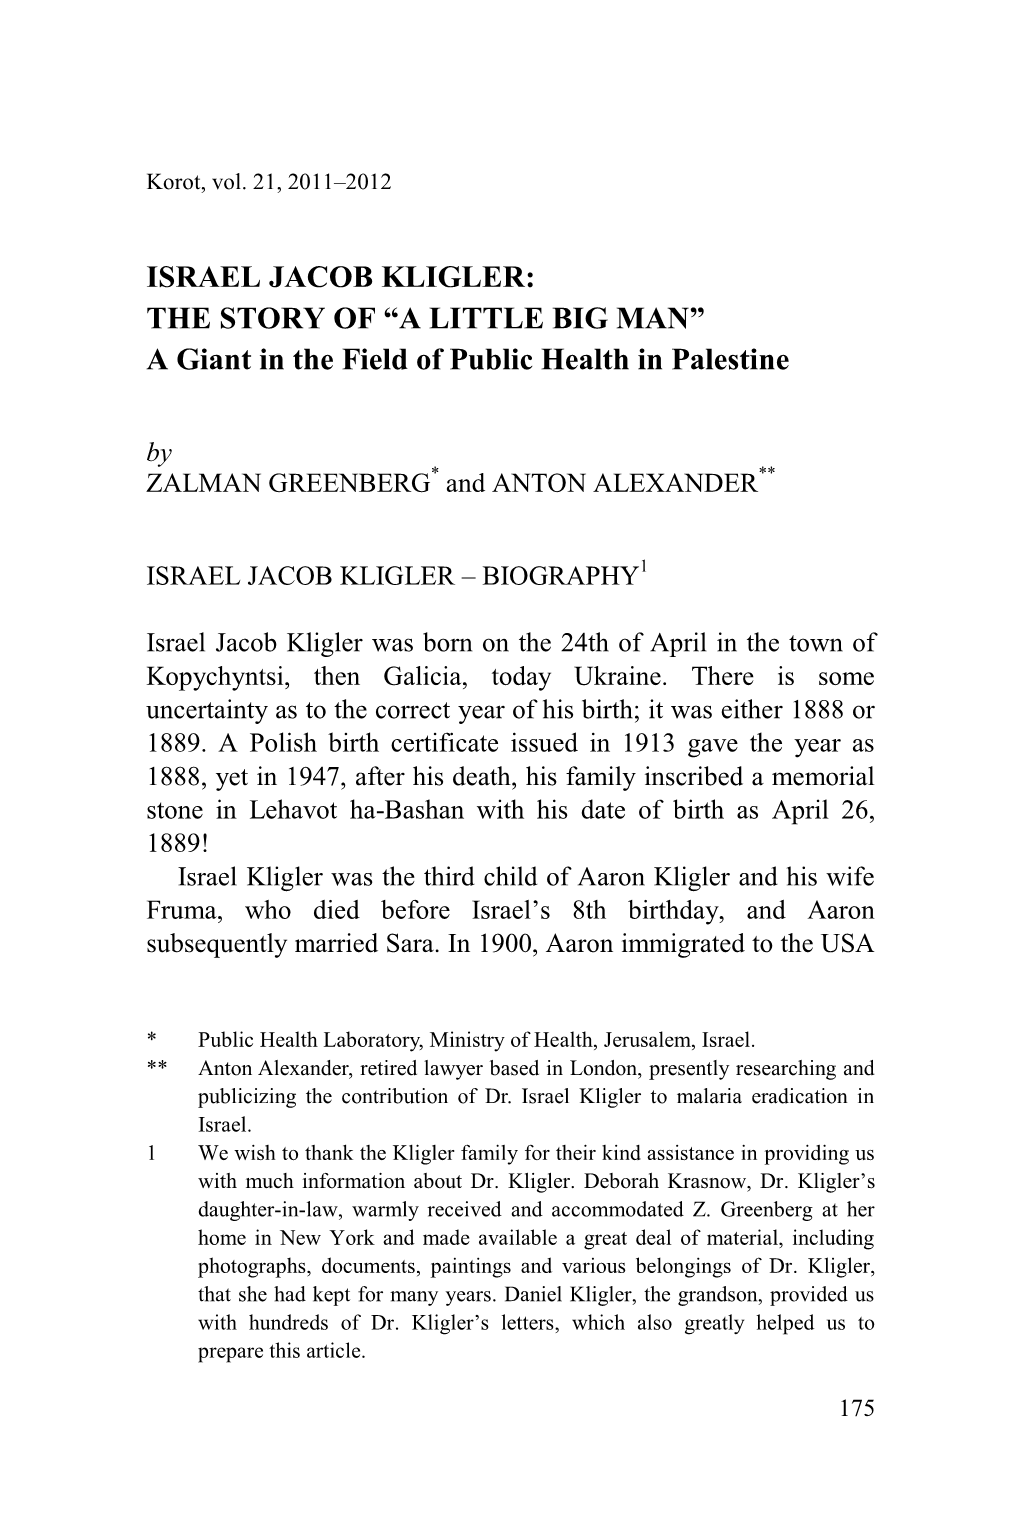 ISRAEL JACOB KLIGLER: the STORY of “A LITTLE BIG MAN” a Giant in the Field of Public Health in Palestine